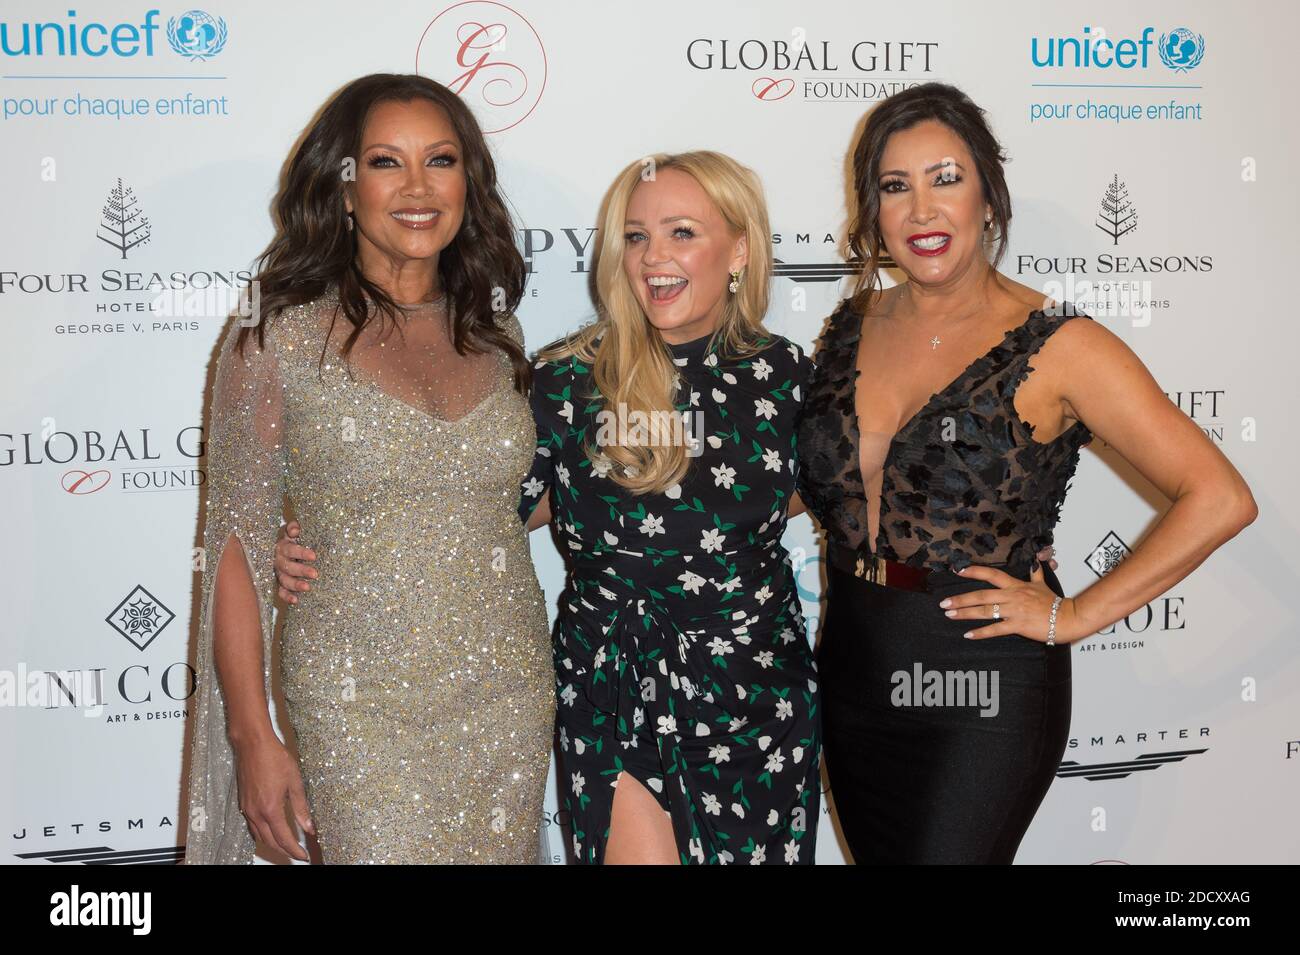 Emma Bunton, Vanessa Lynn Williams and Maria Bravo attending the Global Gift Gala in aid of Unicef France and Global Gift Foundation at Seasons Hotel George V in Paris, France on april 25, 2018 . Photo by Nicolas Genin/ABACAPRESS.COM Stock Photo